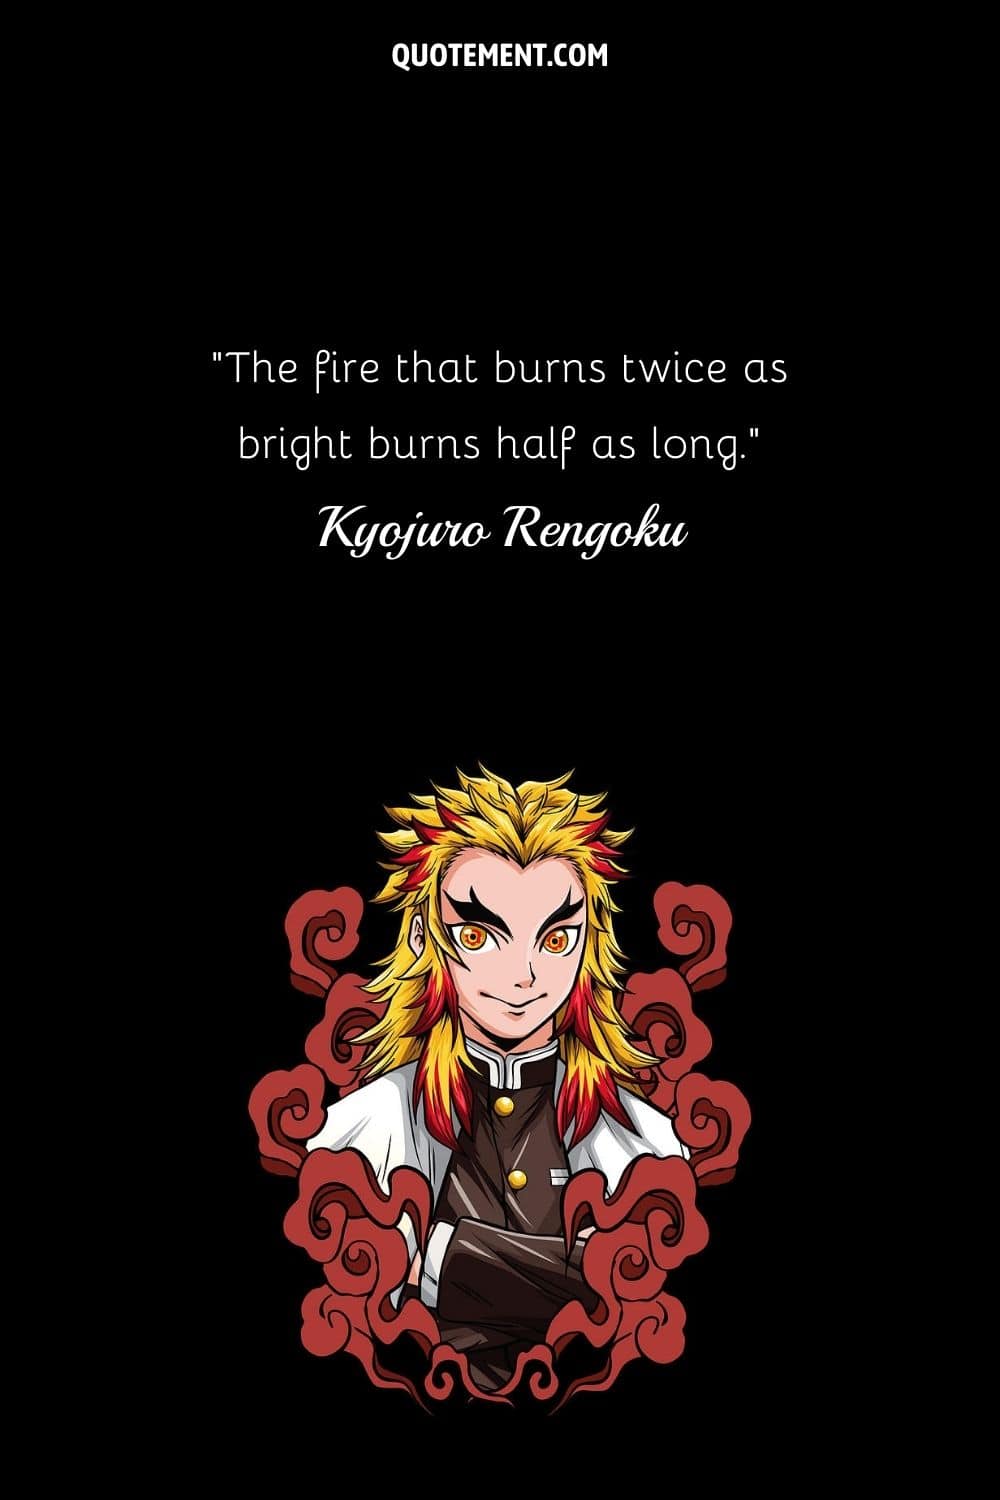 The fire that burns twice as bright burns half as long